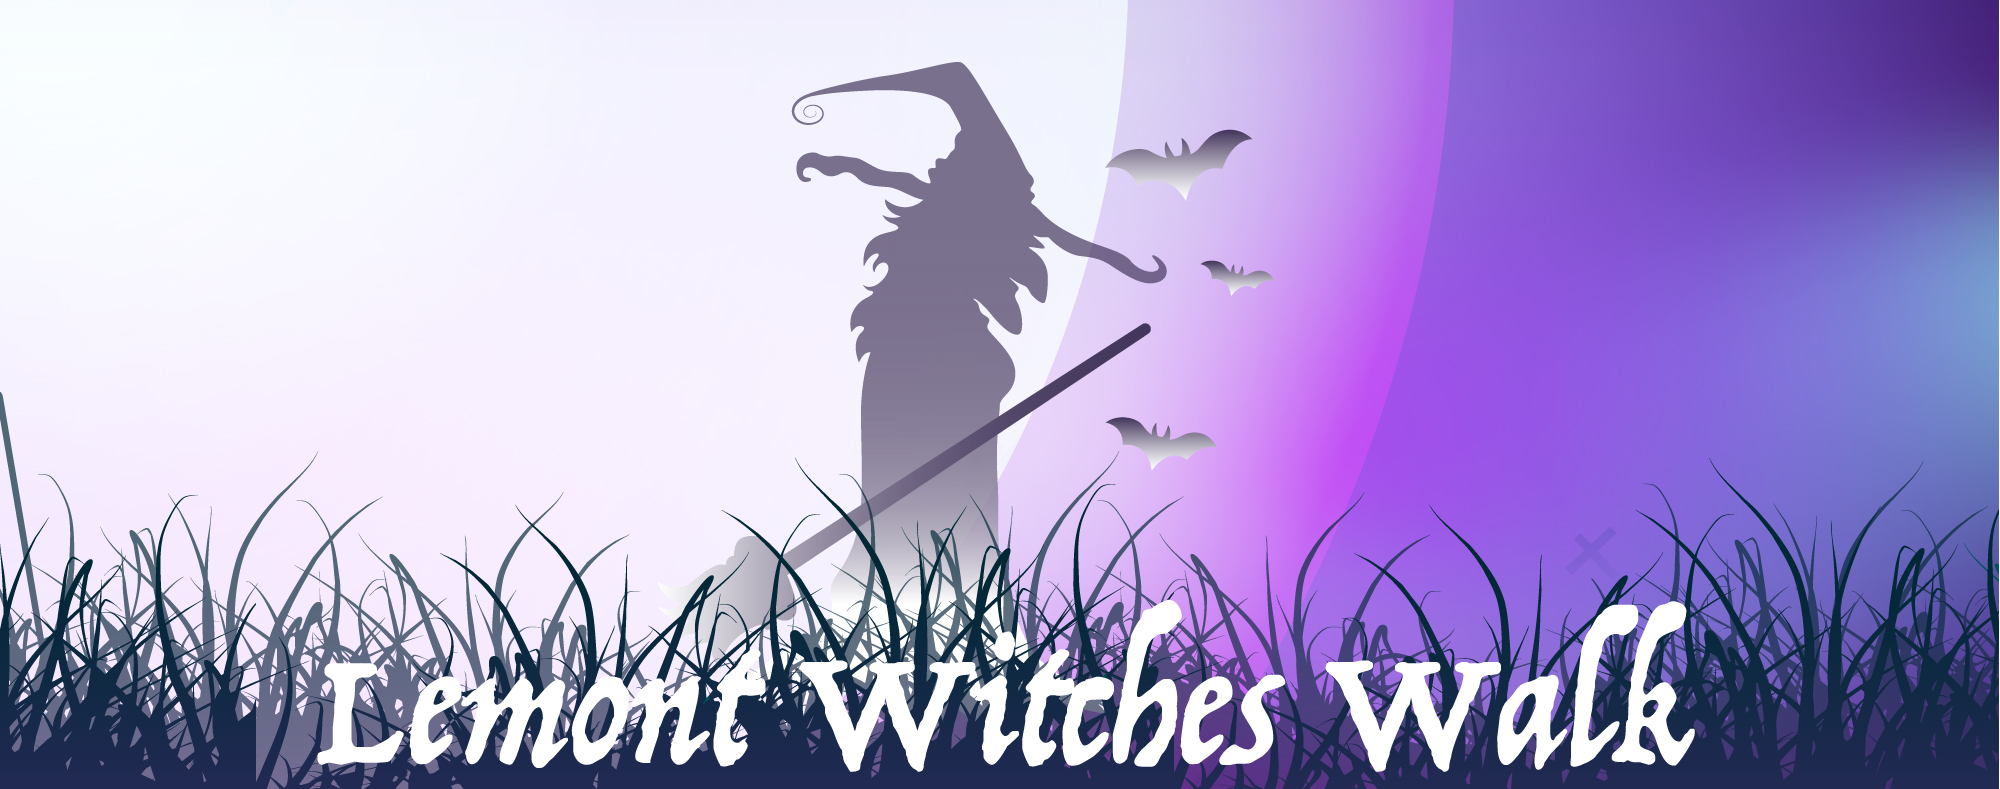 Witch walking in moonlight, text: lemont witches walk